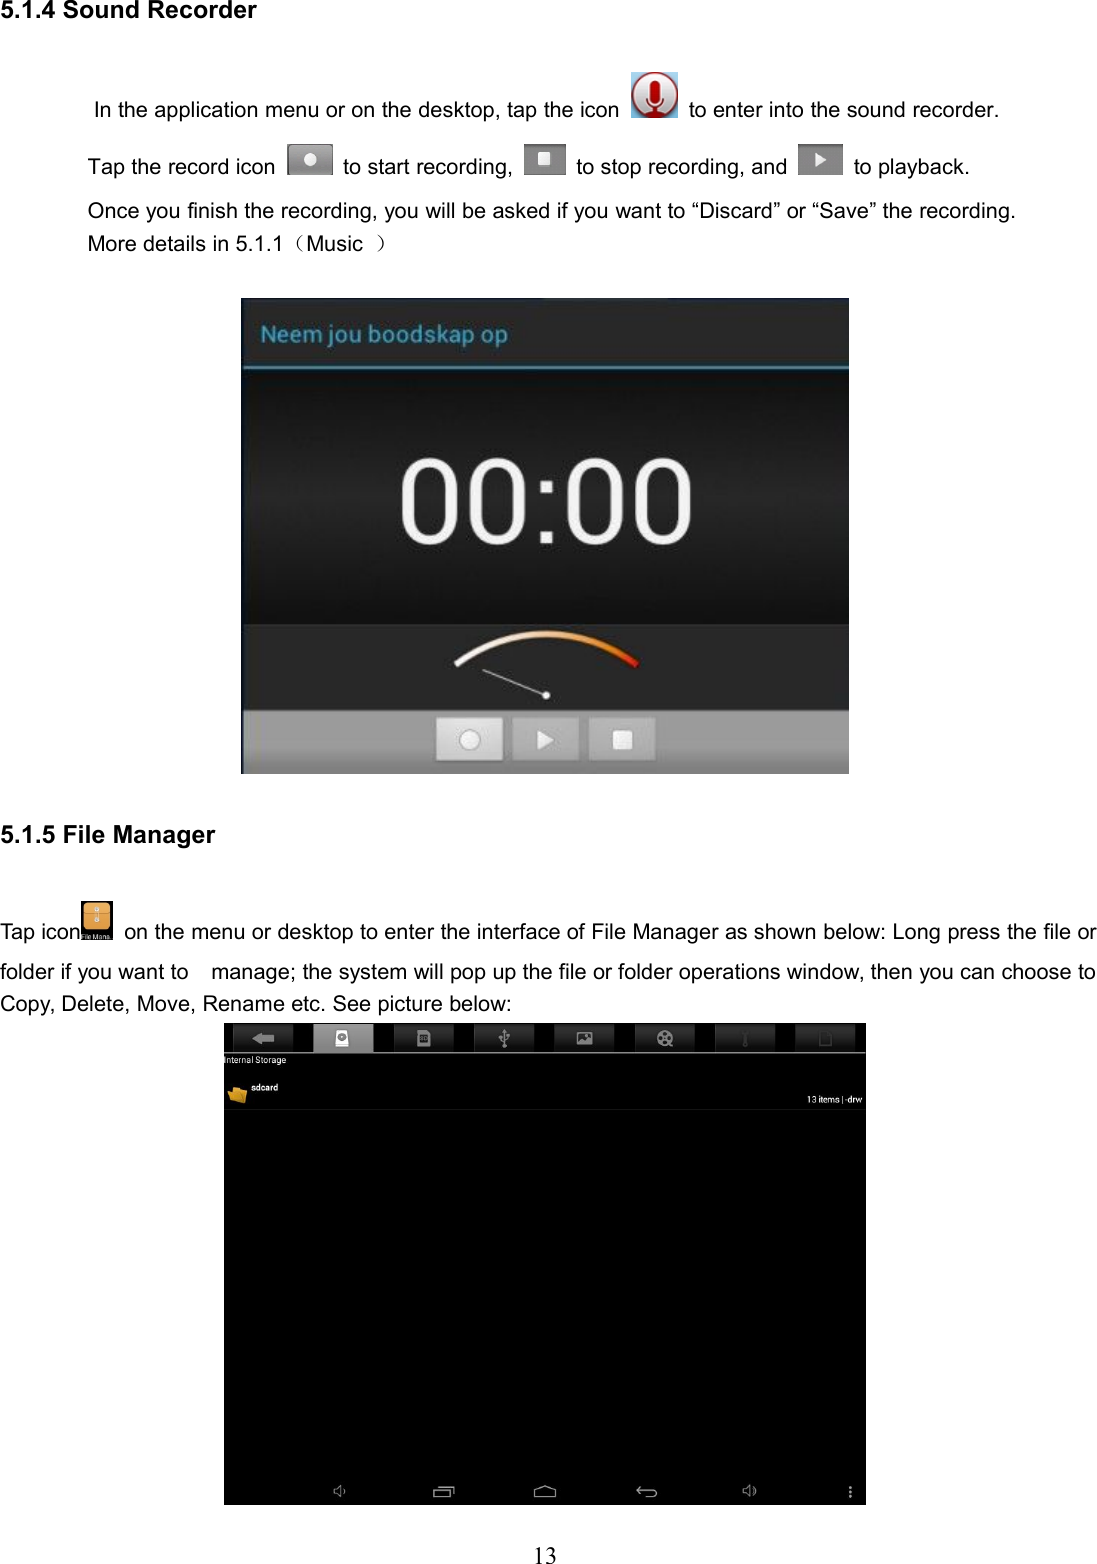 135.1.4 Sound RecorderIn the application menu or on the desktop, tap the icon to enter into the sound recorder.Tap the record icon to start recording, to stop recording, and to playback.Once you finish the recording, you will be asked if you want to “Discard” or “Save” the recording.More details in 5.1.1（Music ）5.1.5 File ManagerTap icon on the menu or desktop to enter the interface of File Manager as shown below: Long press the file orfolder if you want to manage; the system will pop up the file or folder operations window, then you can choose toCopy, Delete, Move, Rename etc. See picture below: